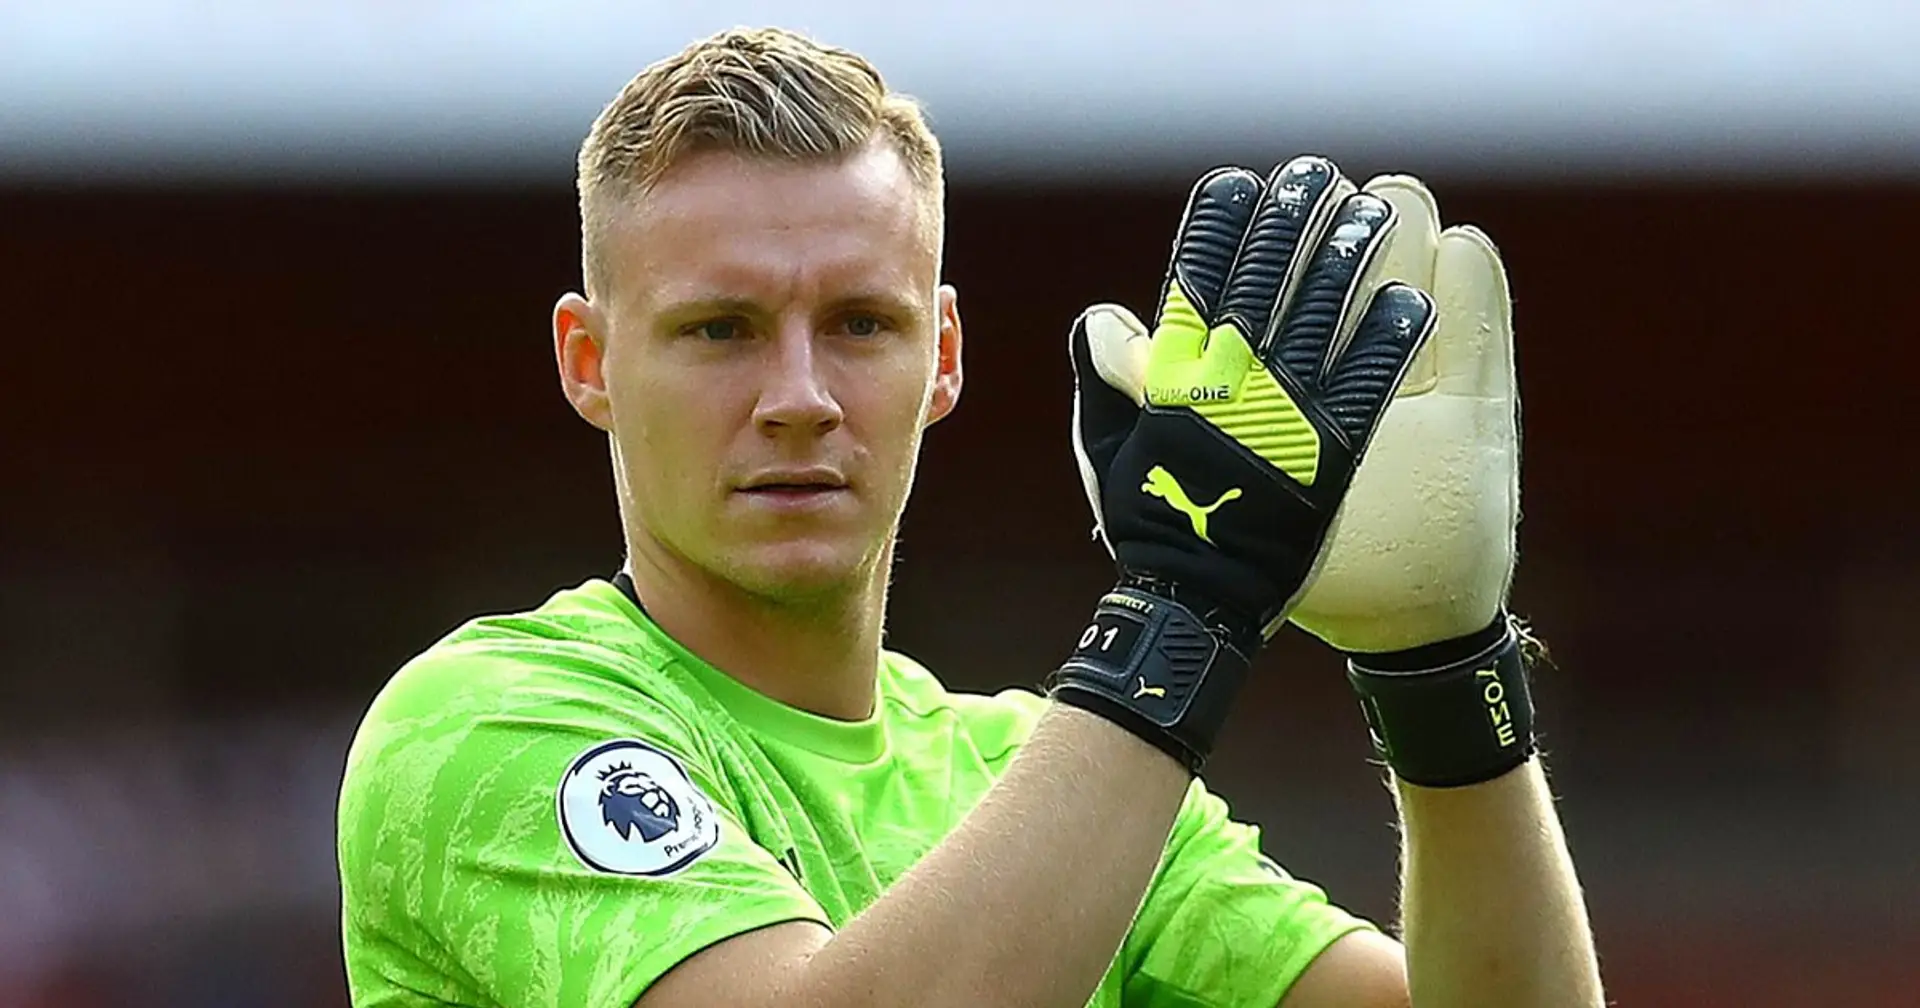 Leno shows off remarkable goalkeeping skills vs Charlton after 3 months out of action